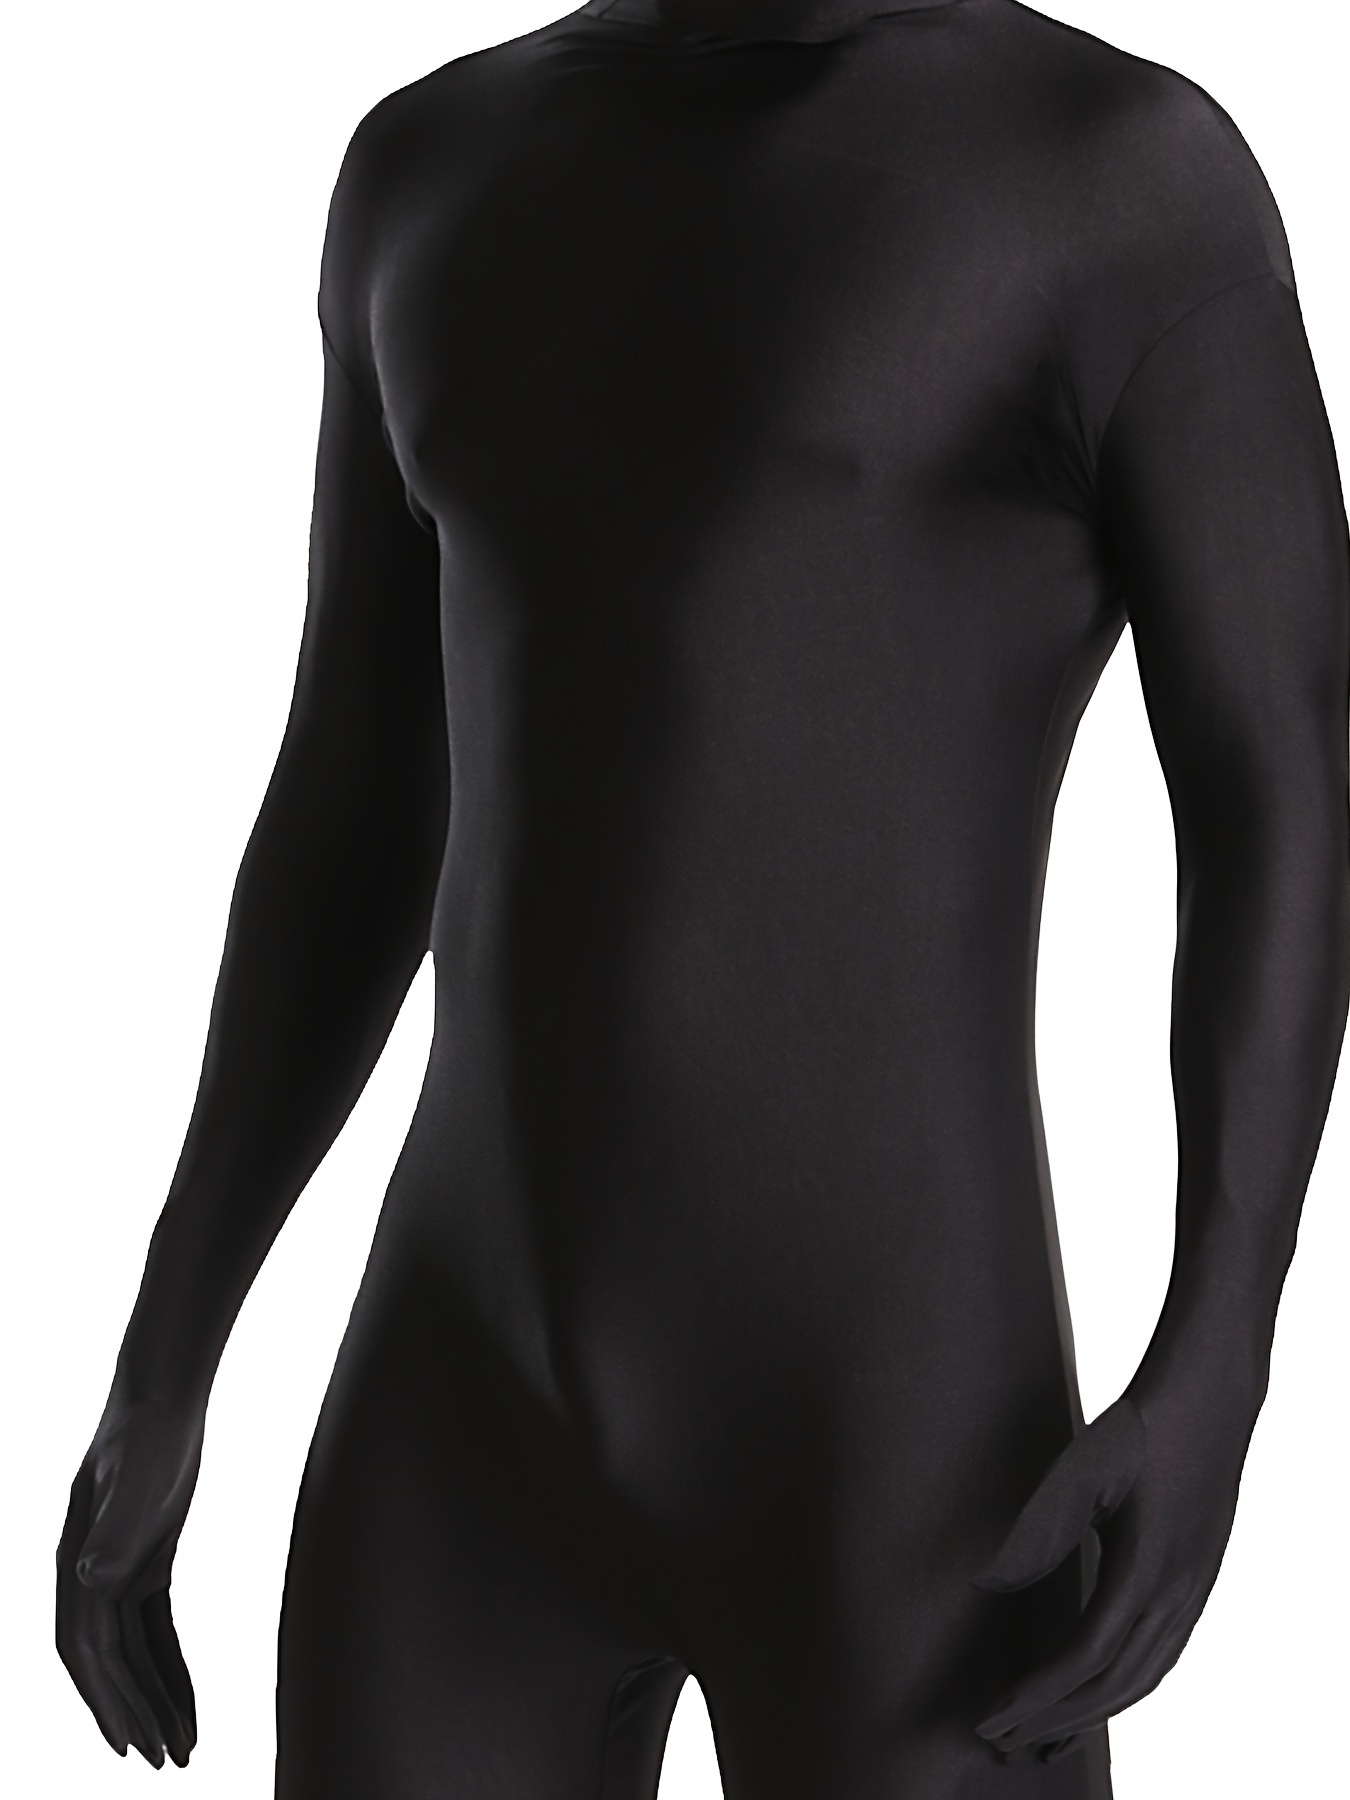 Muscle Costume Lycra Zentai Suit - Clothes for sale in Ampang